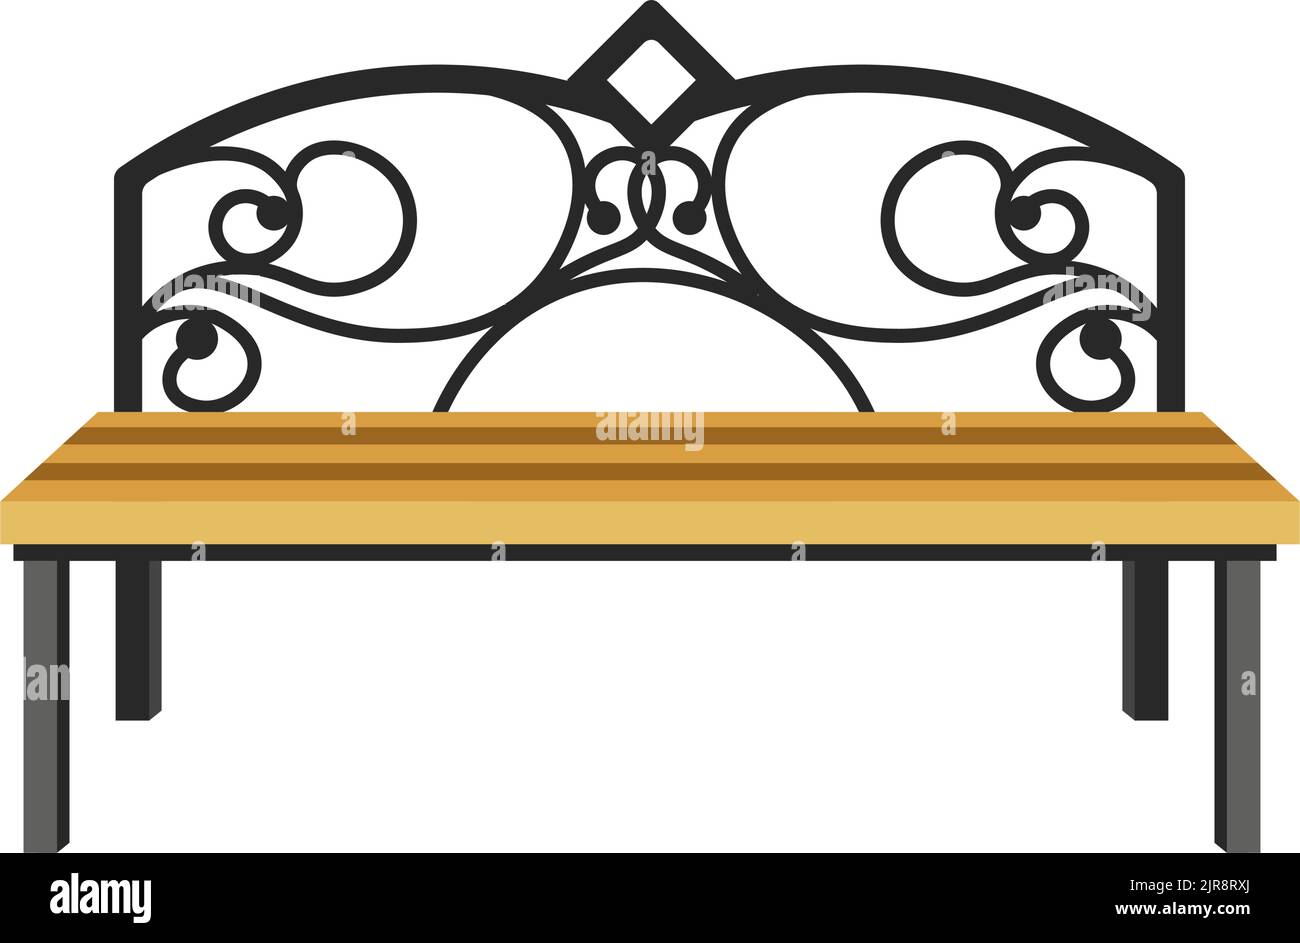 Wooden bench with ornaments, outdoors furniture Stock Vector